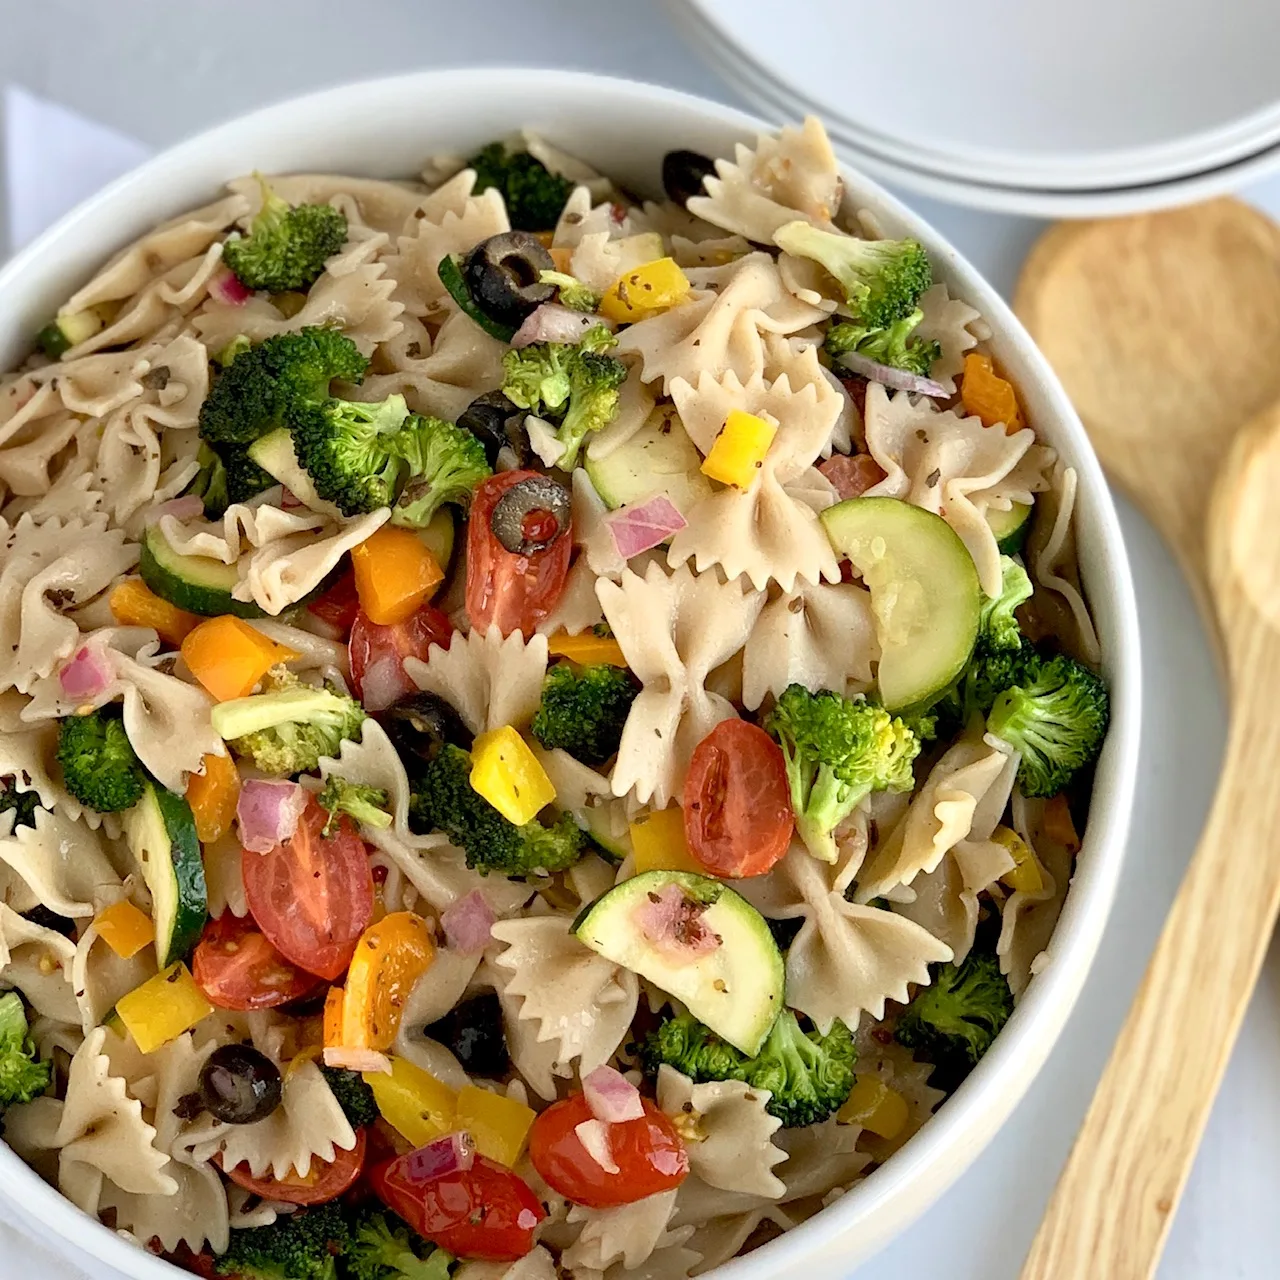 A serving bowl filled with delicious veggie pasta salad.